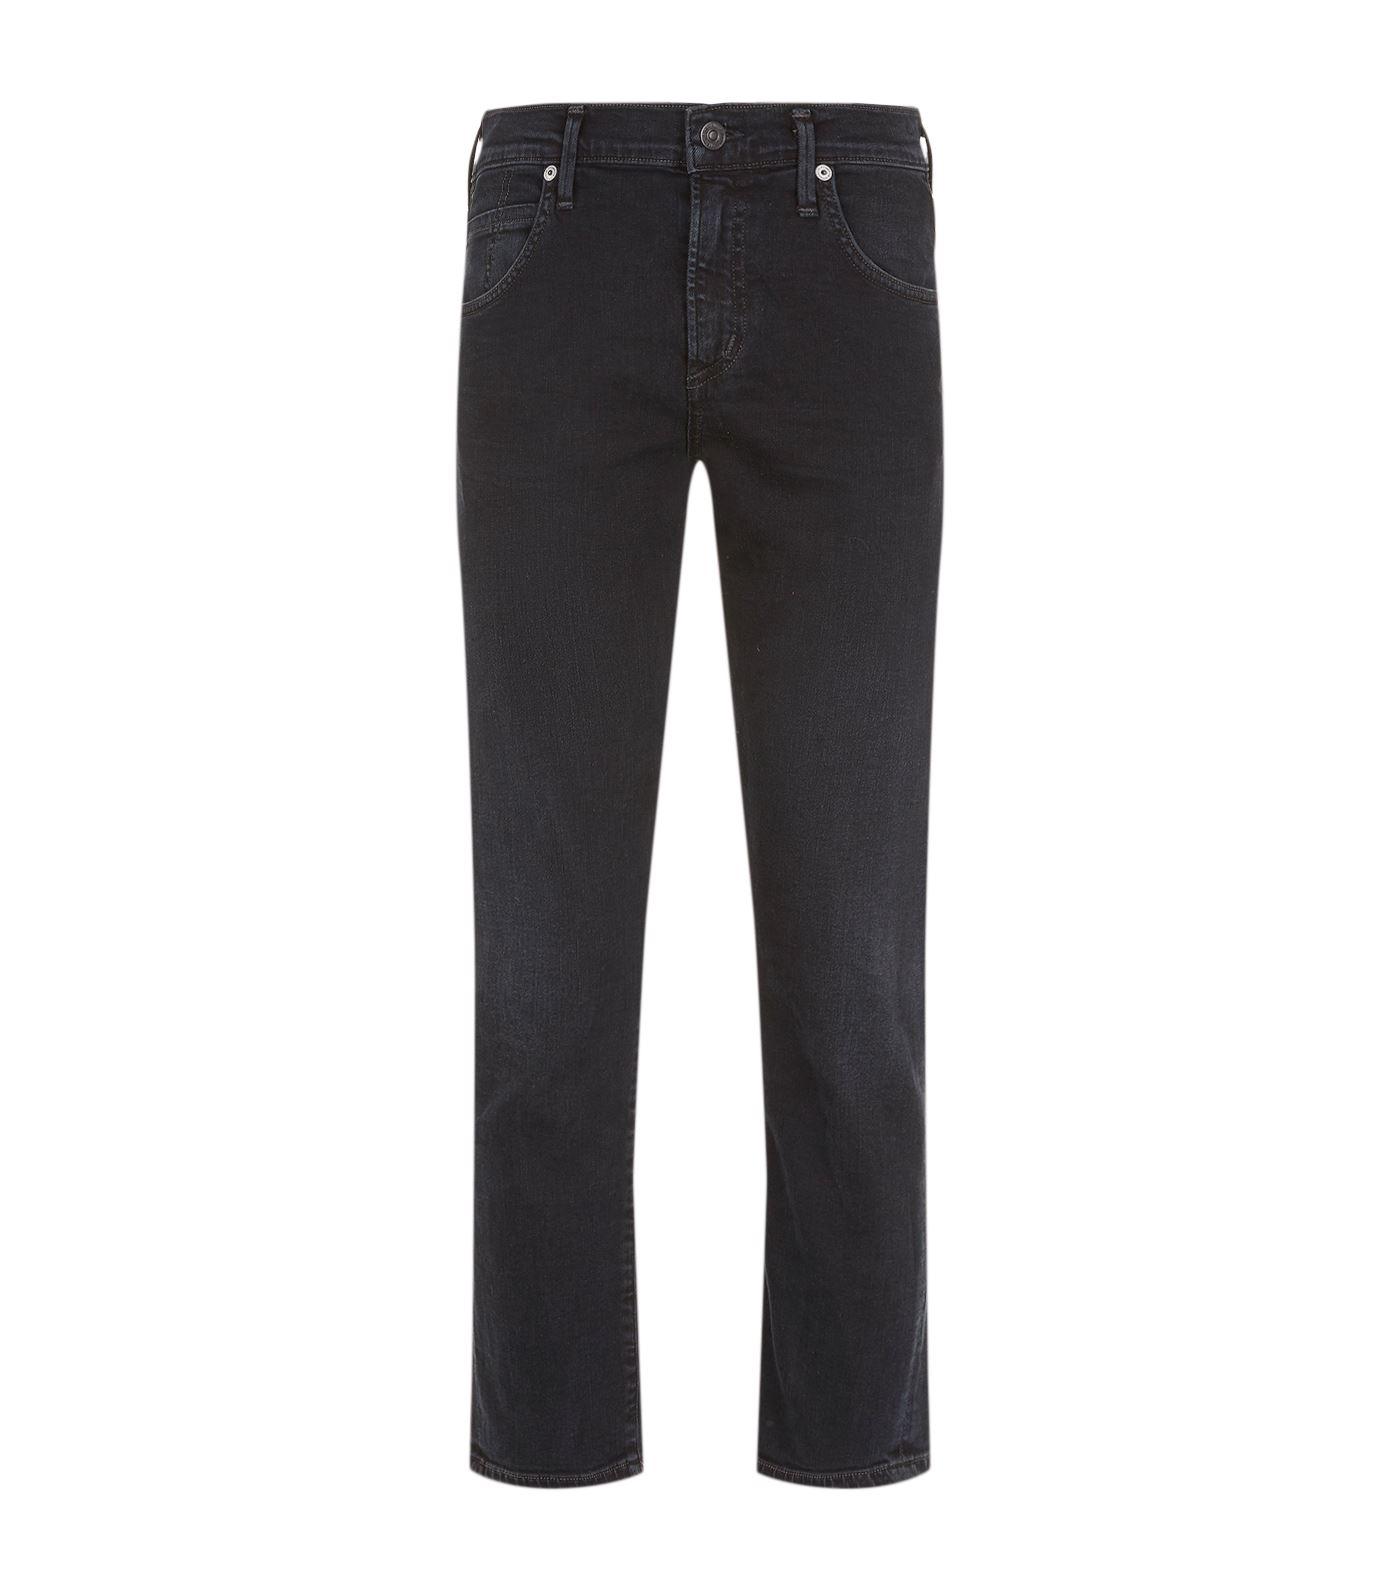 Citizens of Humanity Denim Elsa Mid Rise Cropped Jeans in Black - Lyst